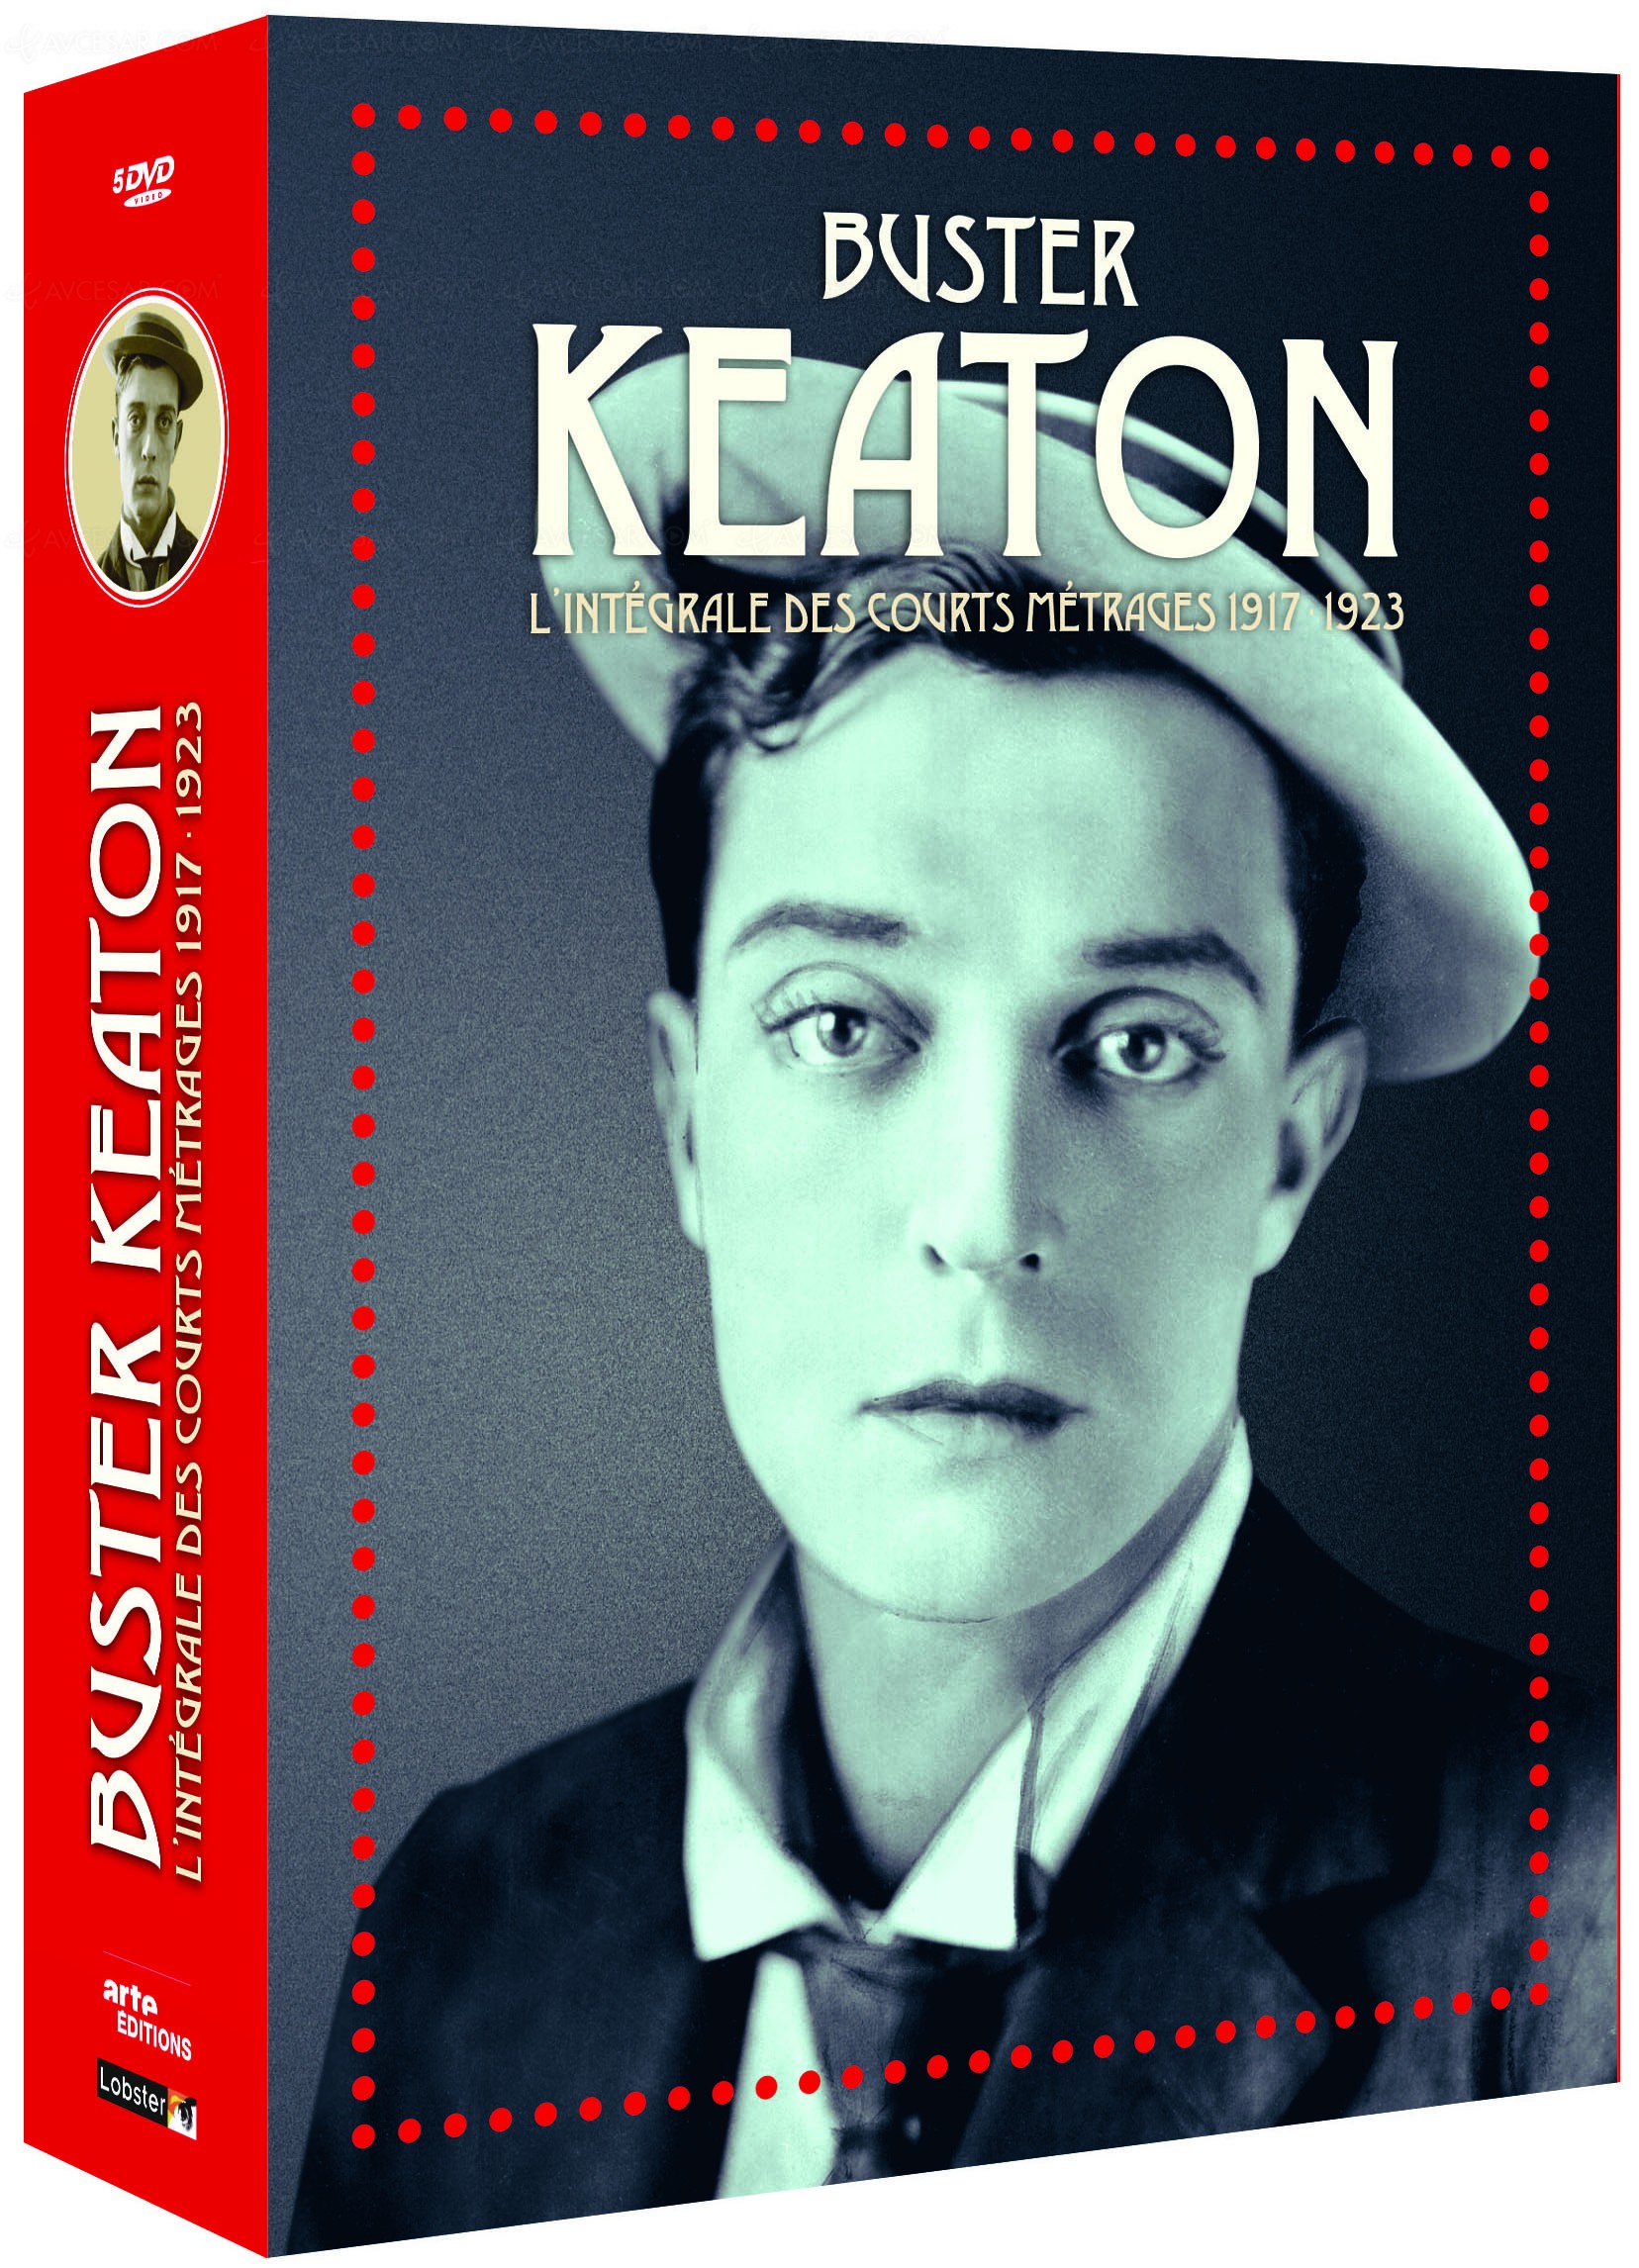 quotes-of-buster-keaton